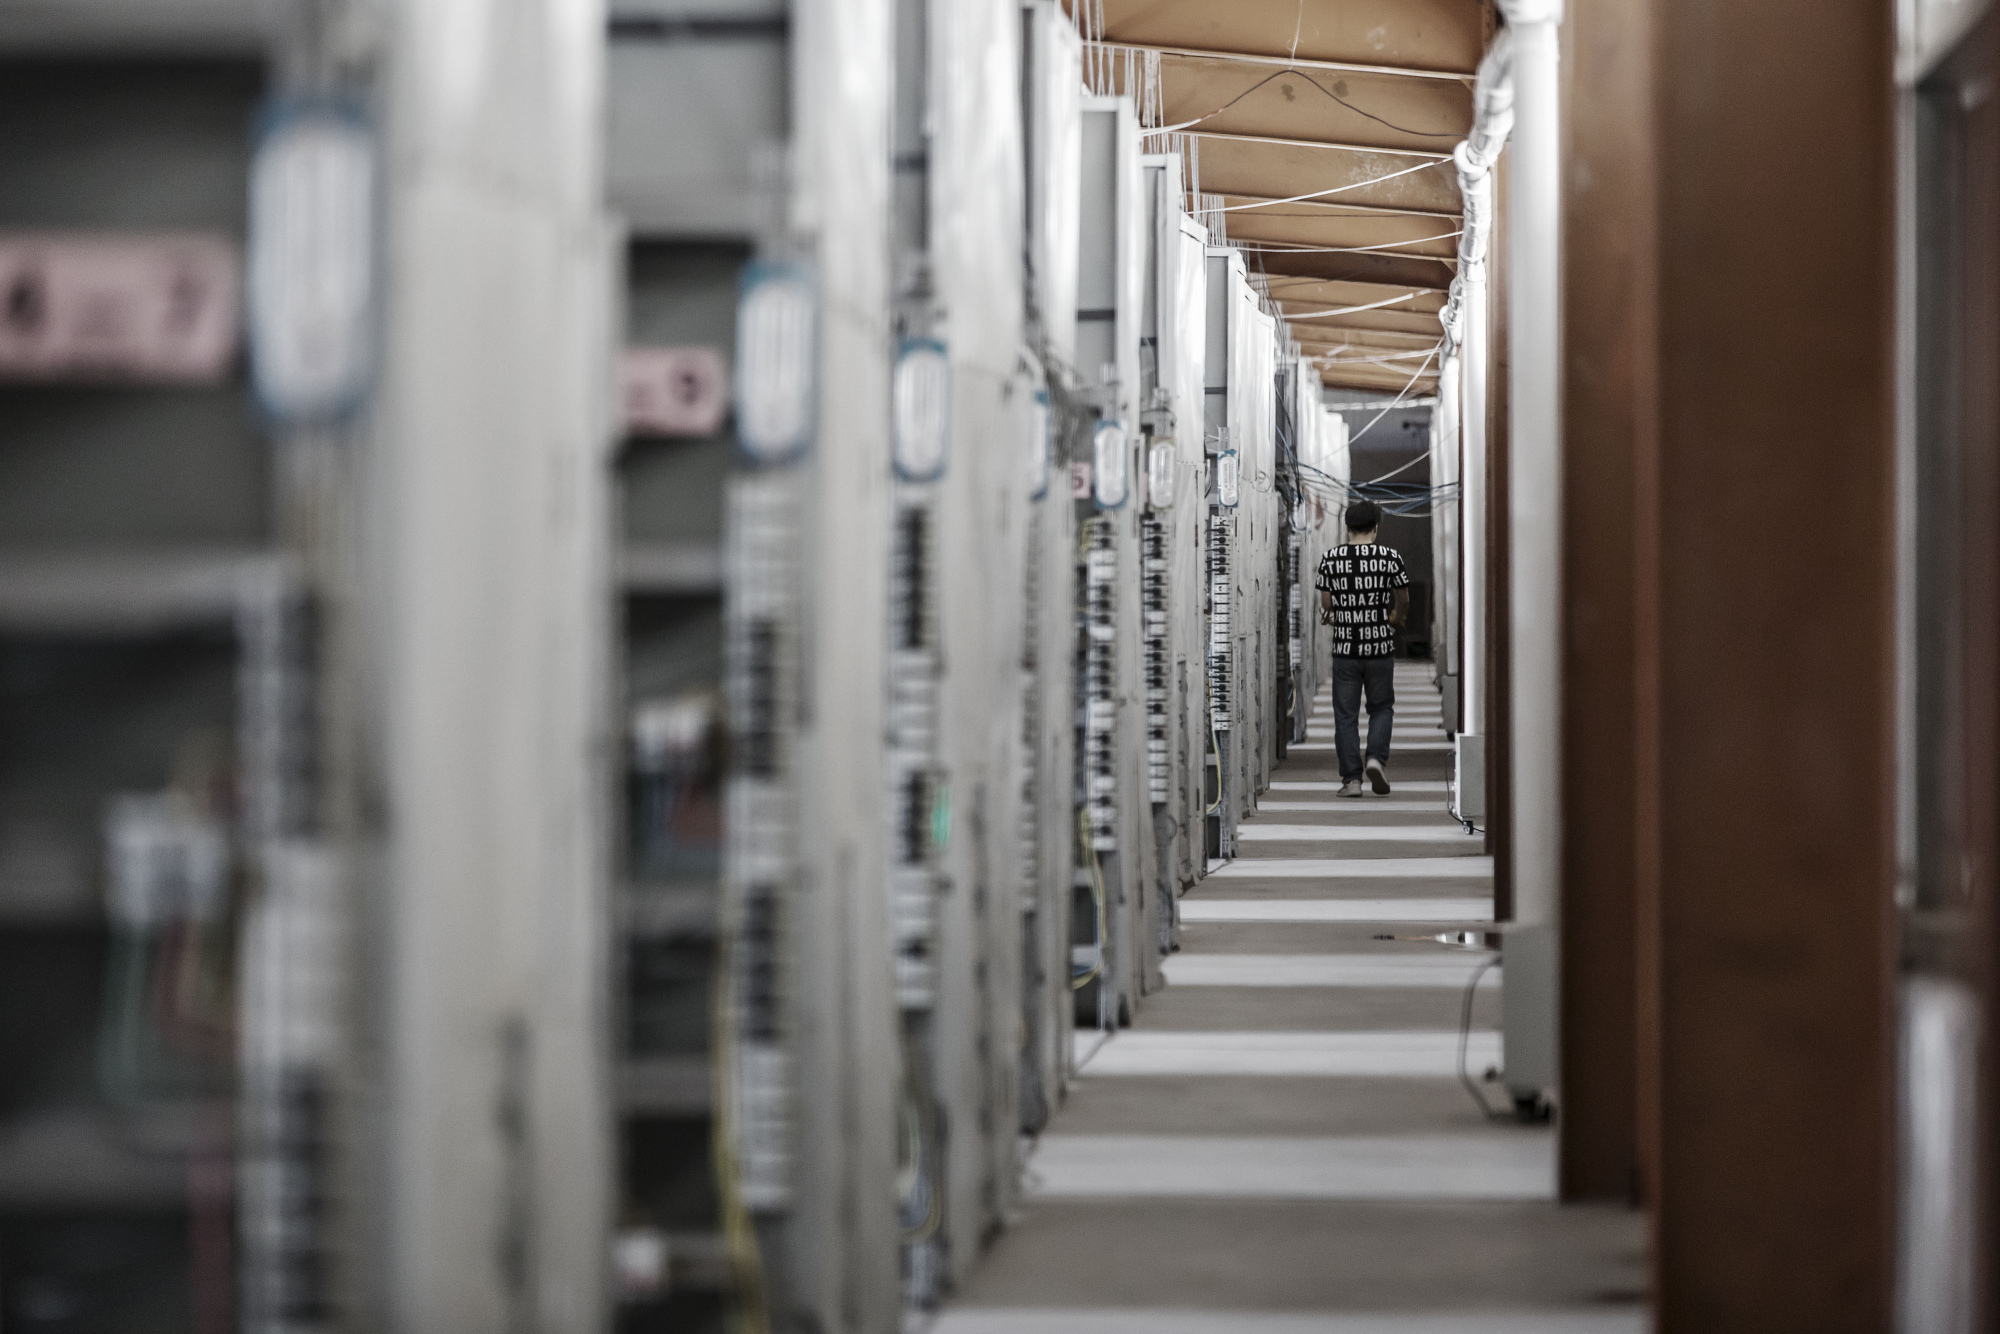 A technician walks past shelves containing bitcoin mining machines in Ordos, Inner Mongolia, China.